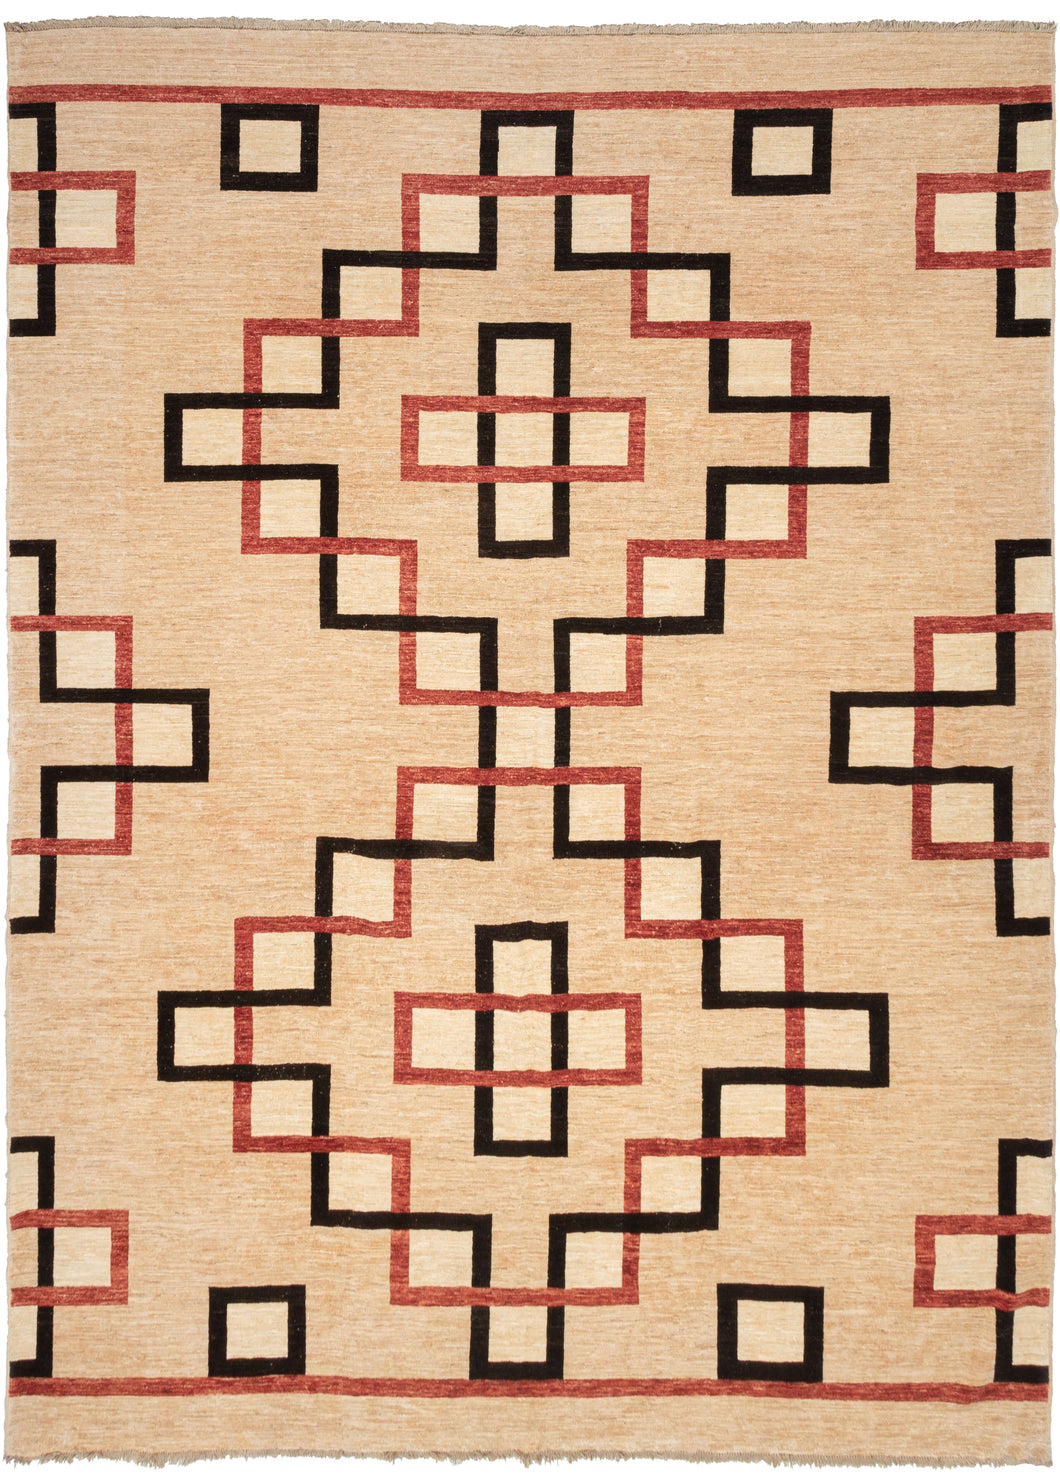 Contemporary Afghan large rug featuring a classic Navajo palette enlarged into a large scale which is uncommon for Navajo weaving. An interesting geometric composition of interlocking boxes in red, black, white, and beige compose the classic patterning. It has a heavy handle with a soft and velvety pile from local Afghan wool.